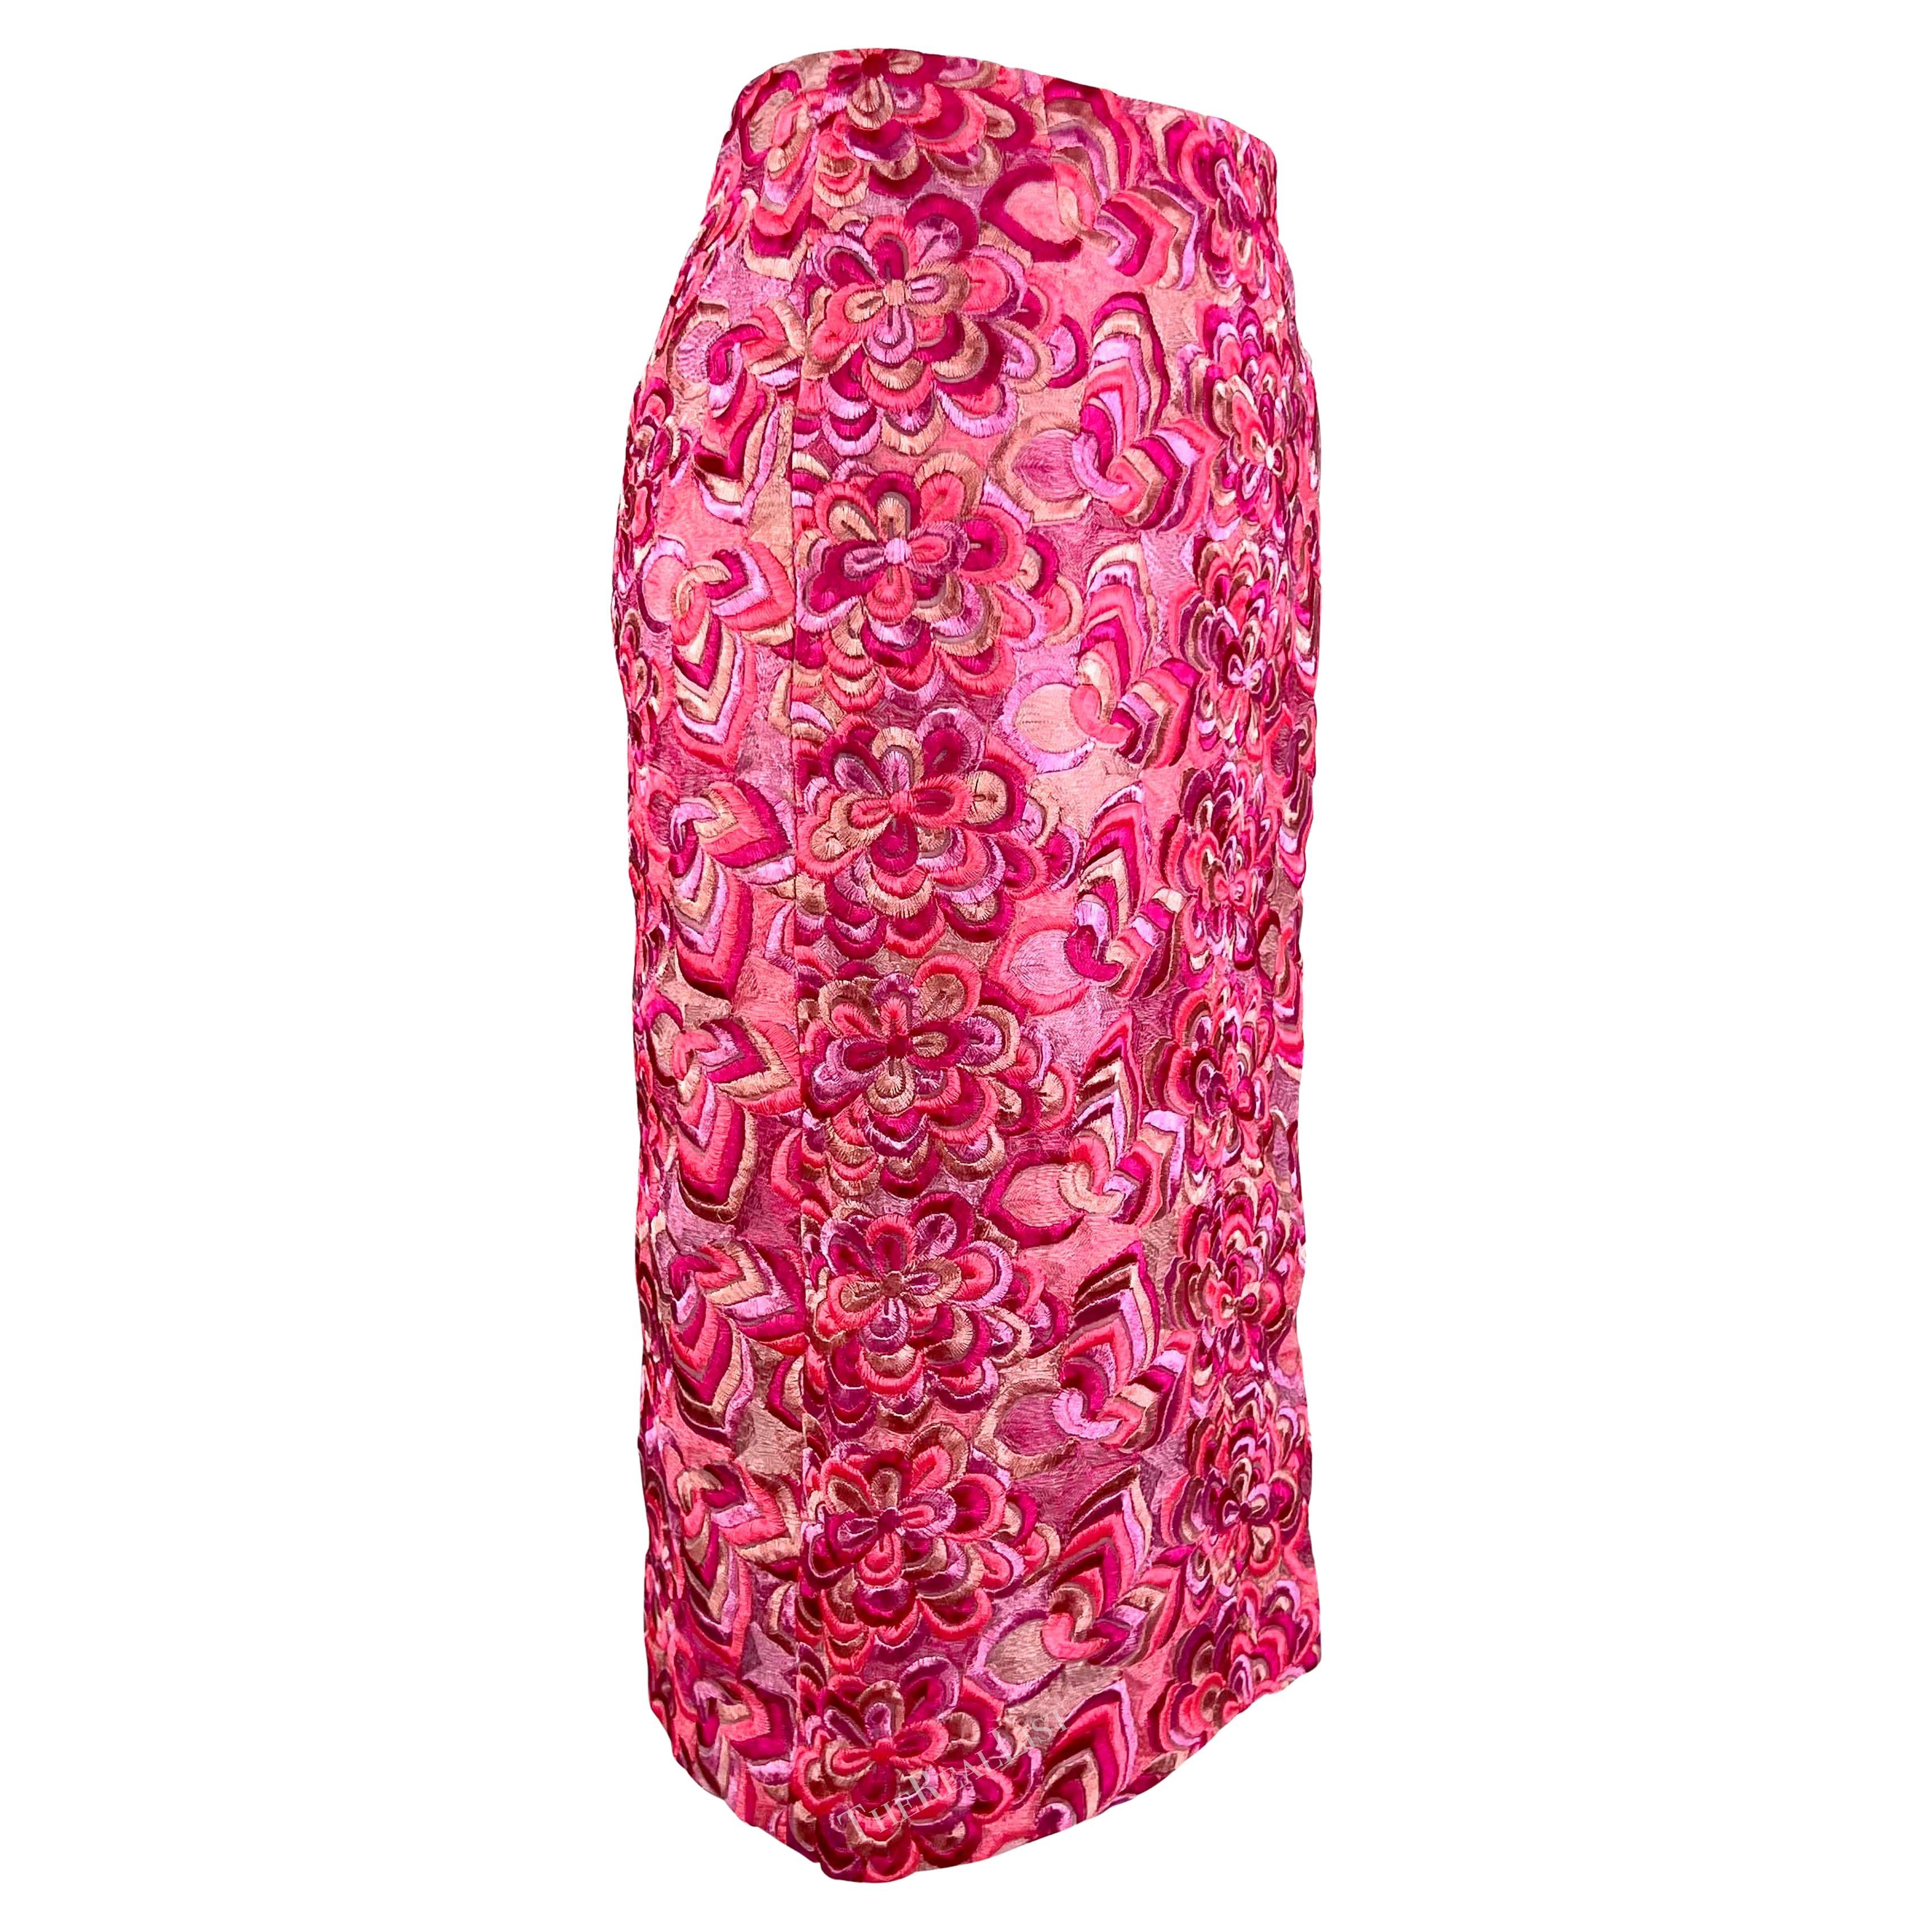 S/S 2000 Gianni Versace by Donatella Neon Pink Floral Embroidered Skirt For Sale 3